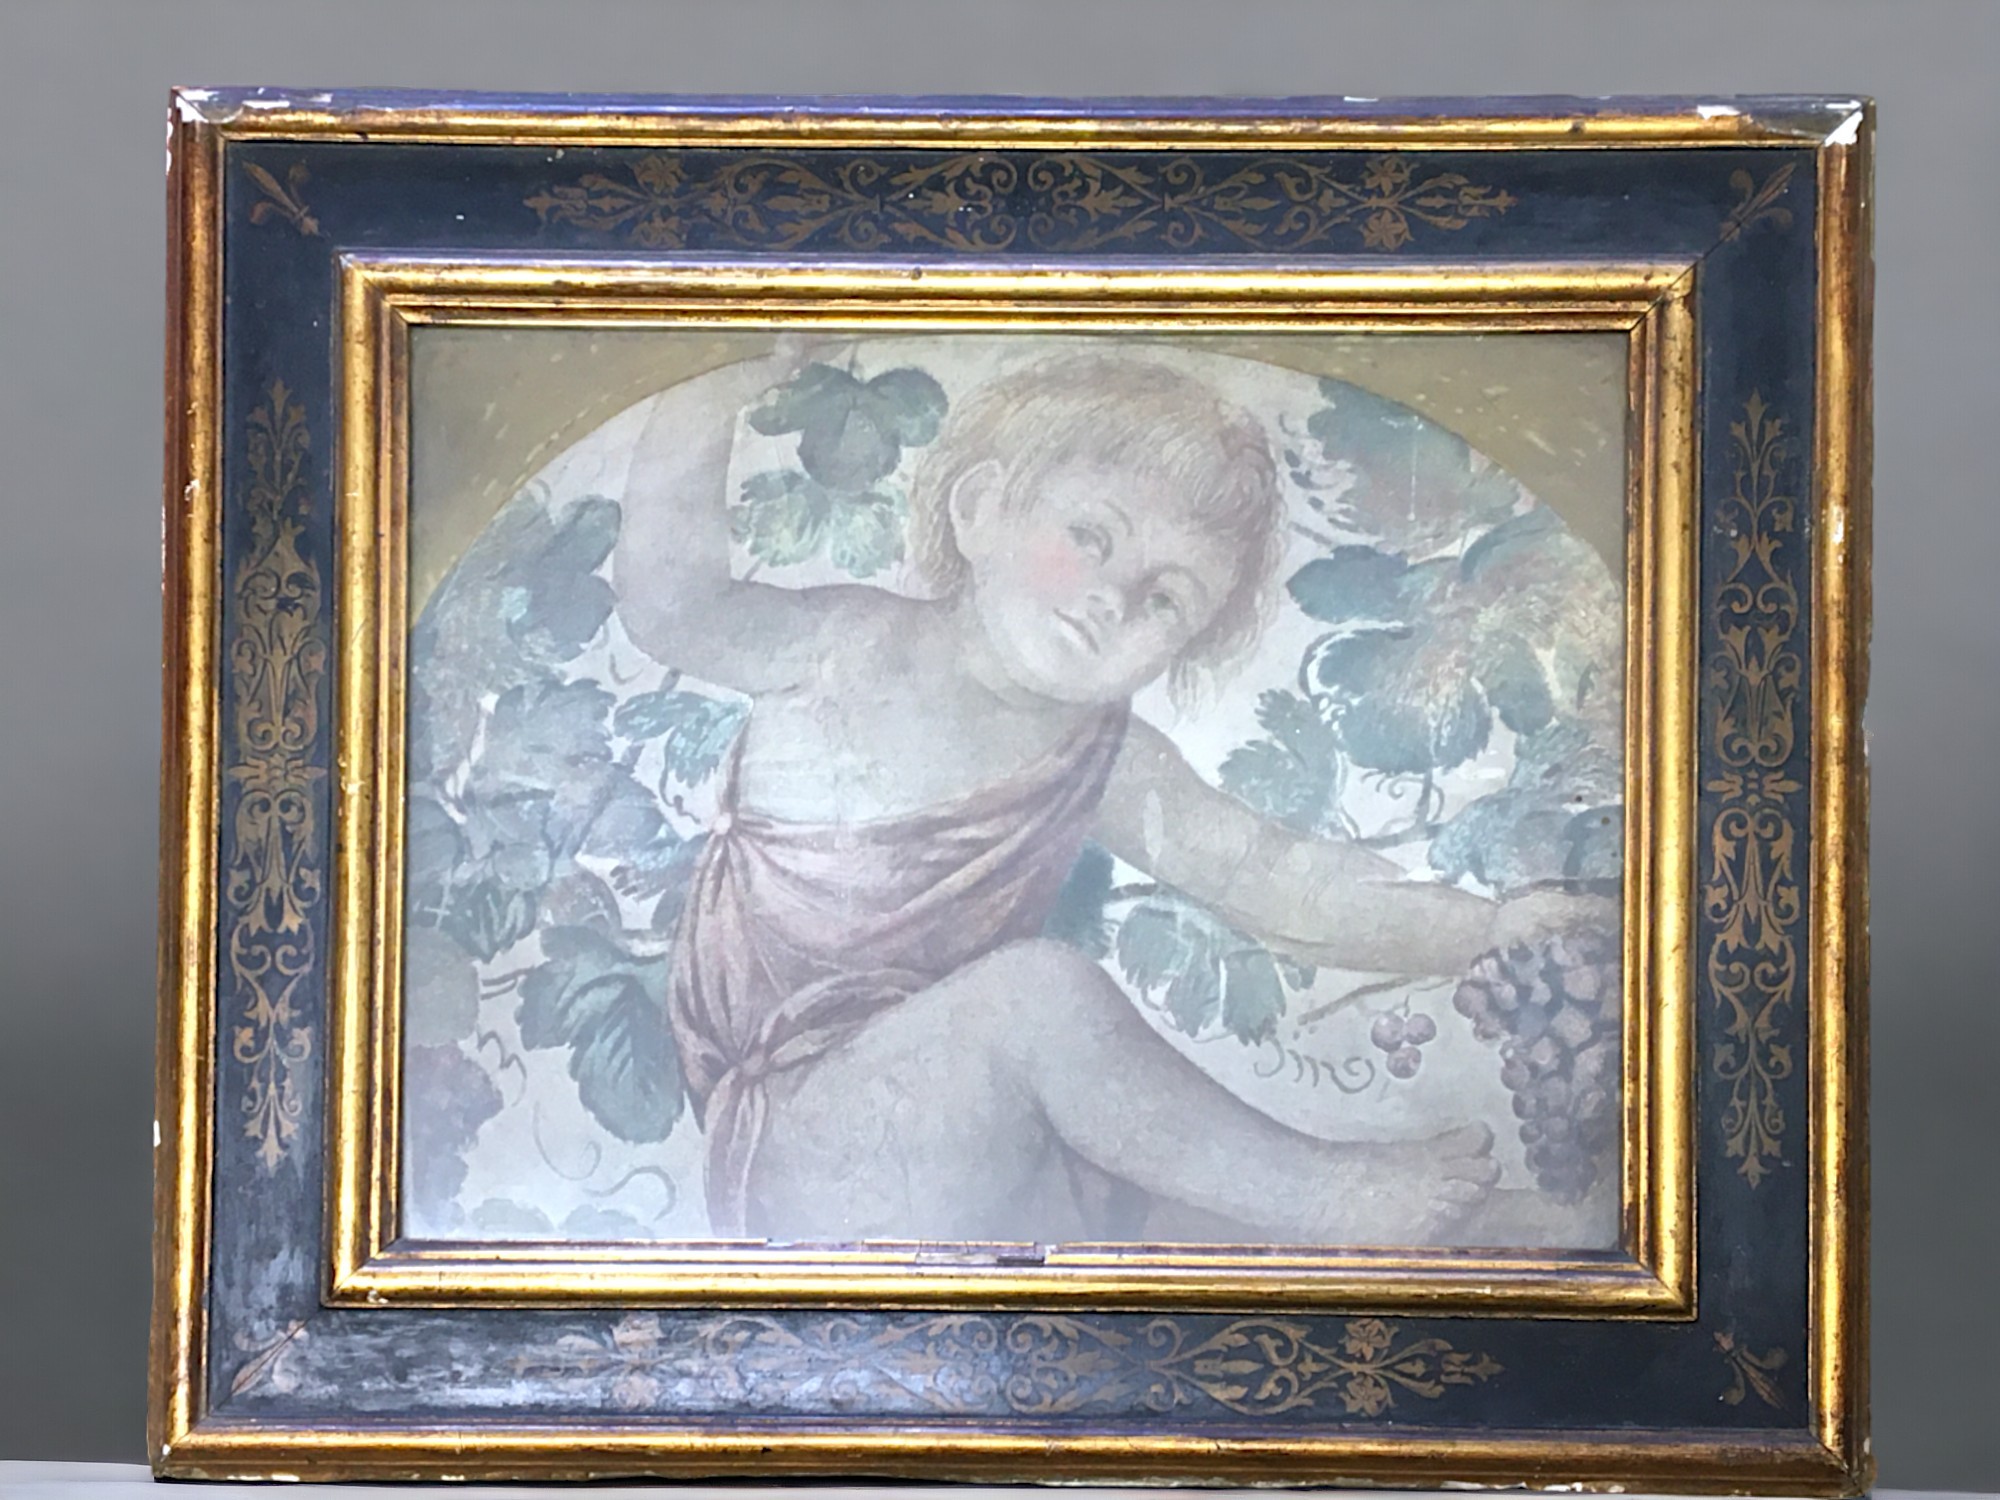 18th/19th Century Italian Bachanalian Putti in Gilt Faux Boule frame. Appears to be hand painted, po